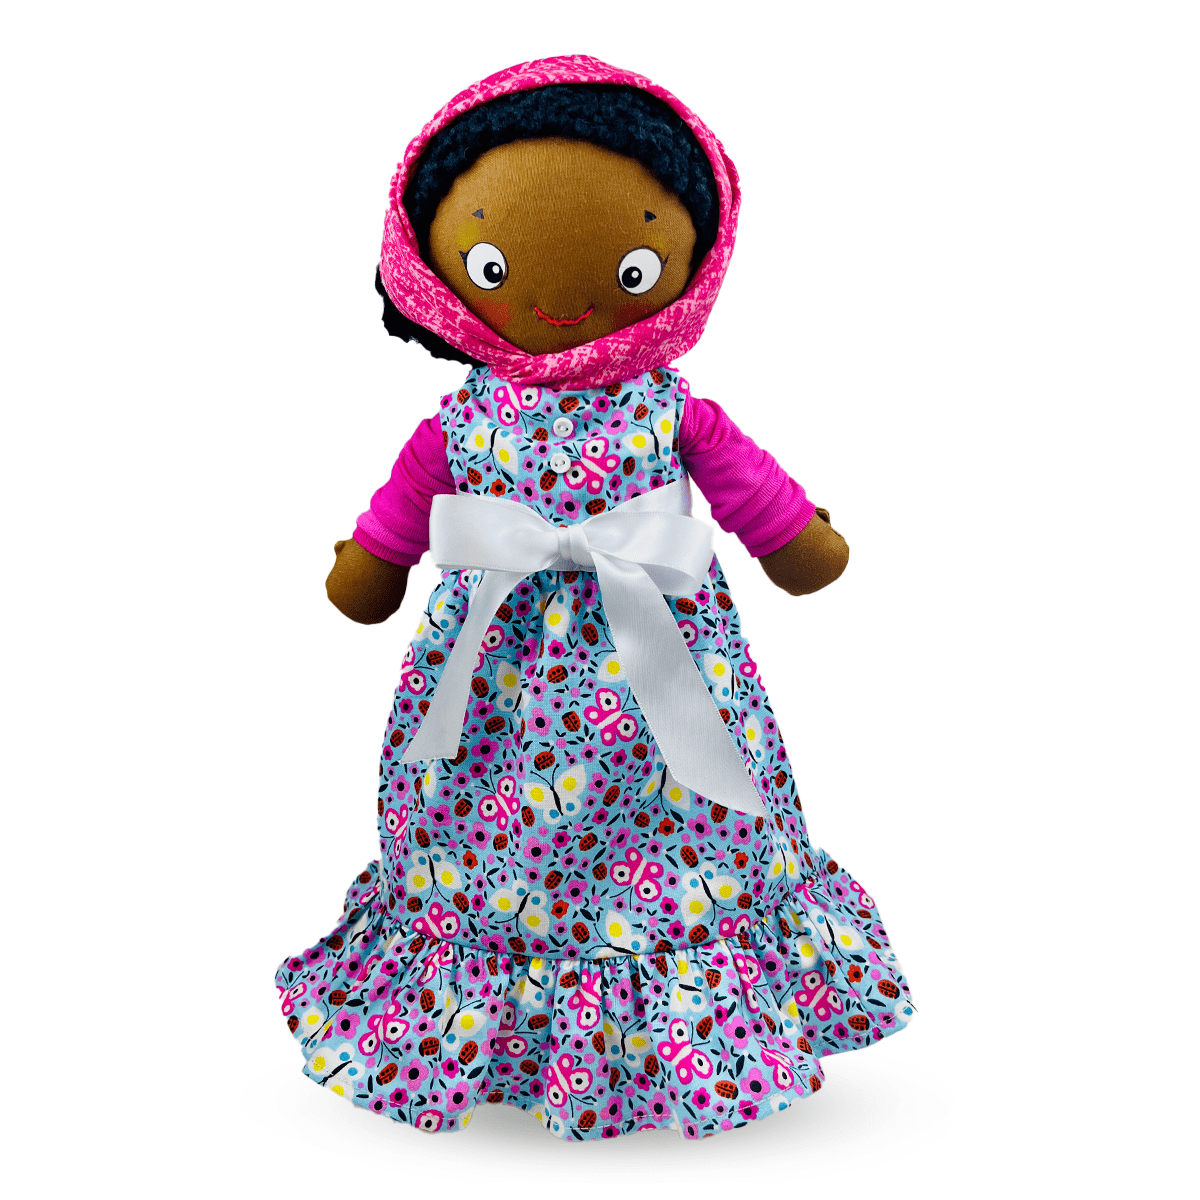 Black Dolls Matter® promotes the representation of children of color through its diverse selection of dolls., WELCOME, BLACK DOLLS MATTER